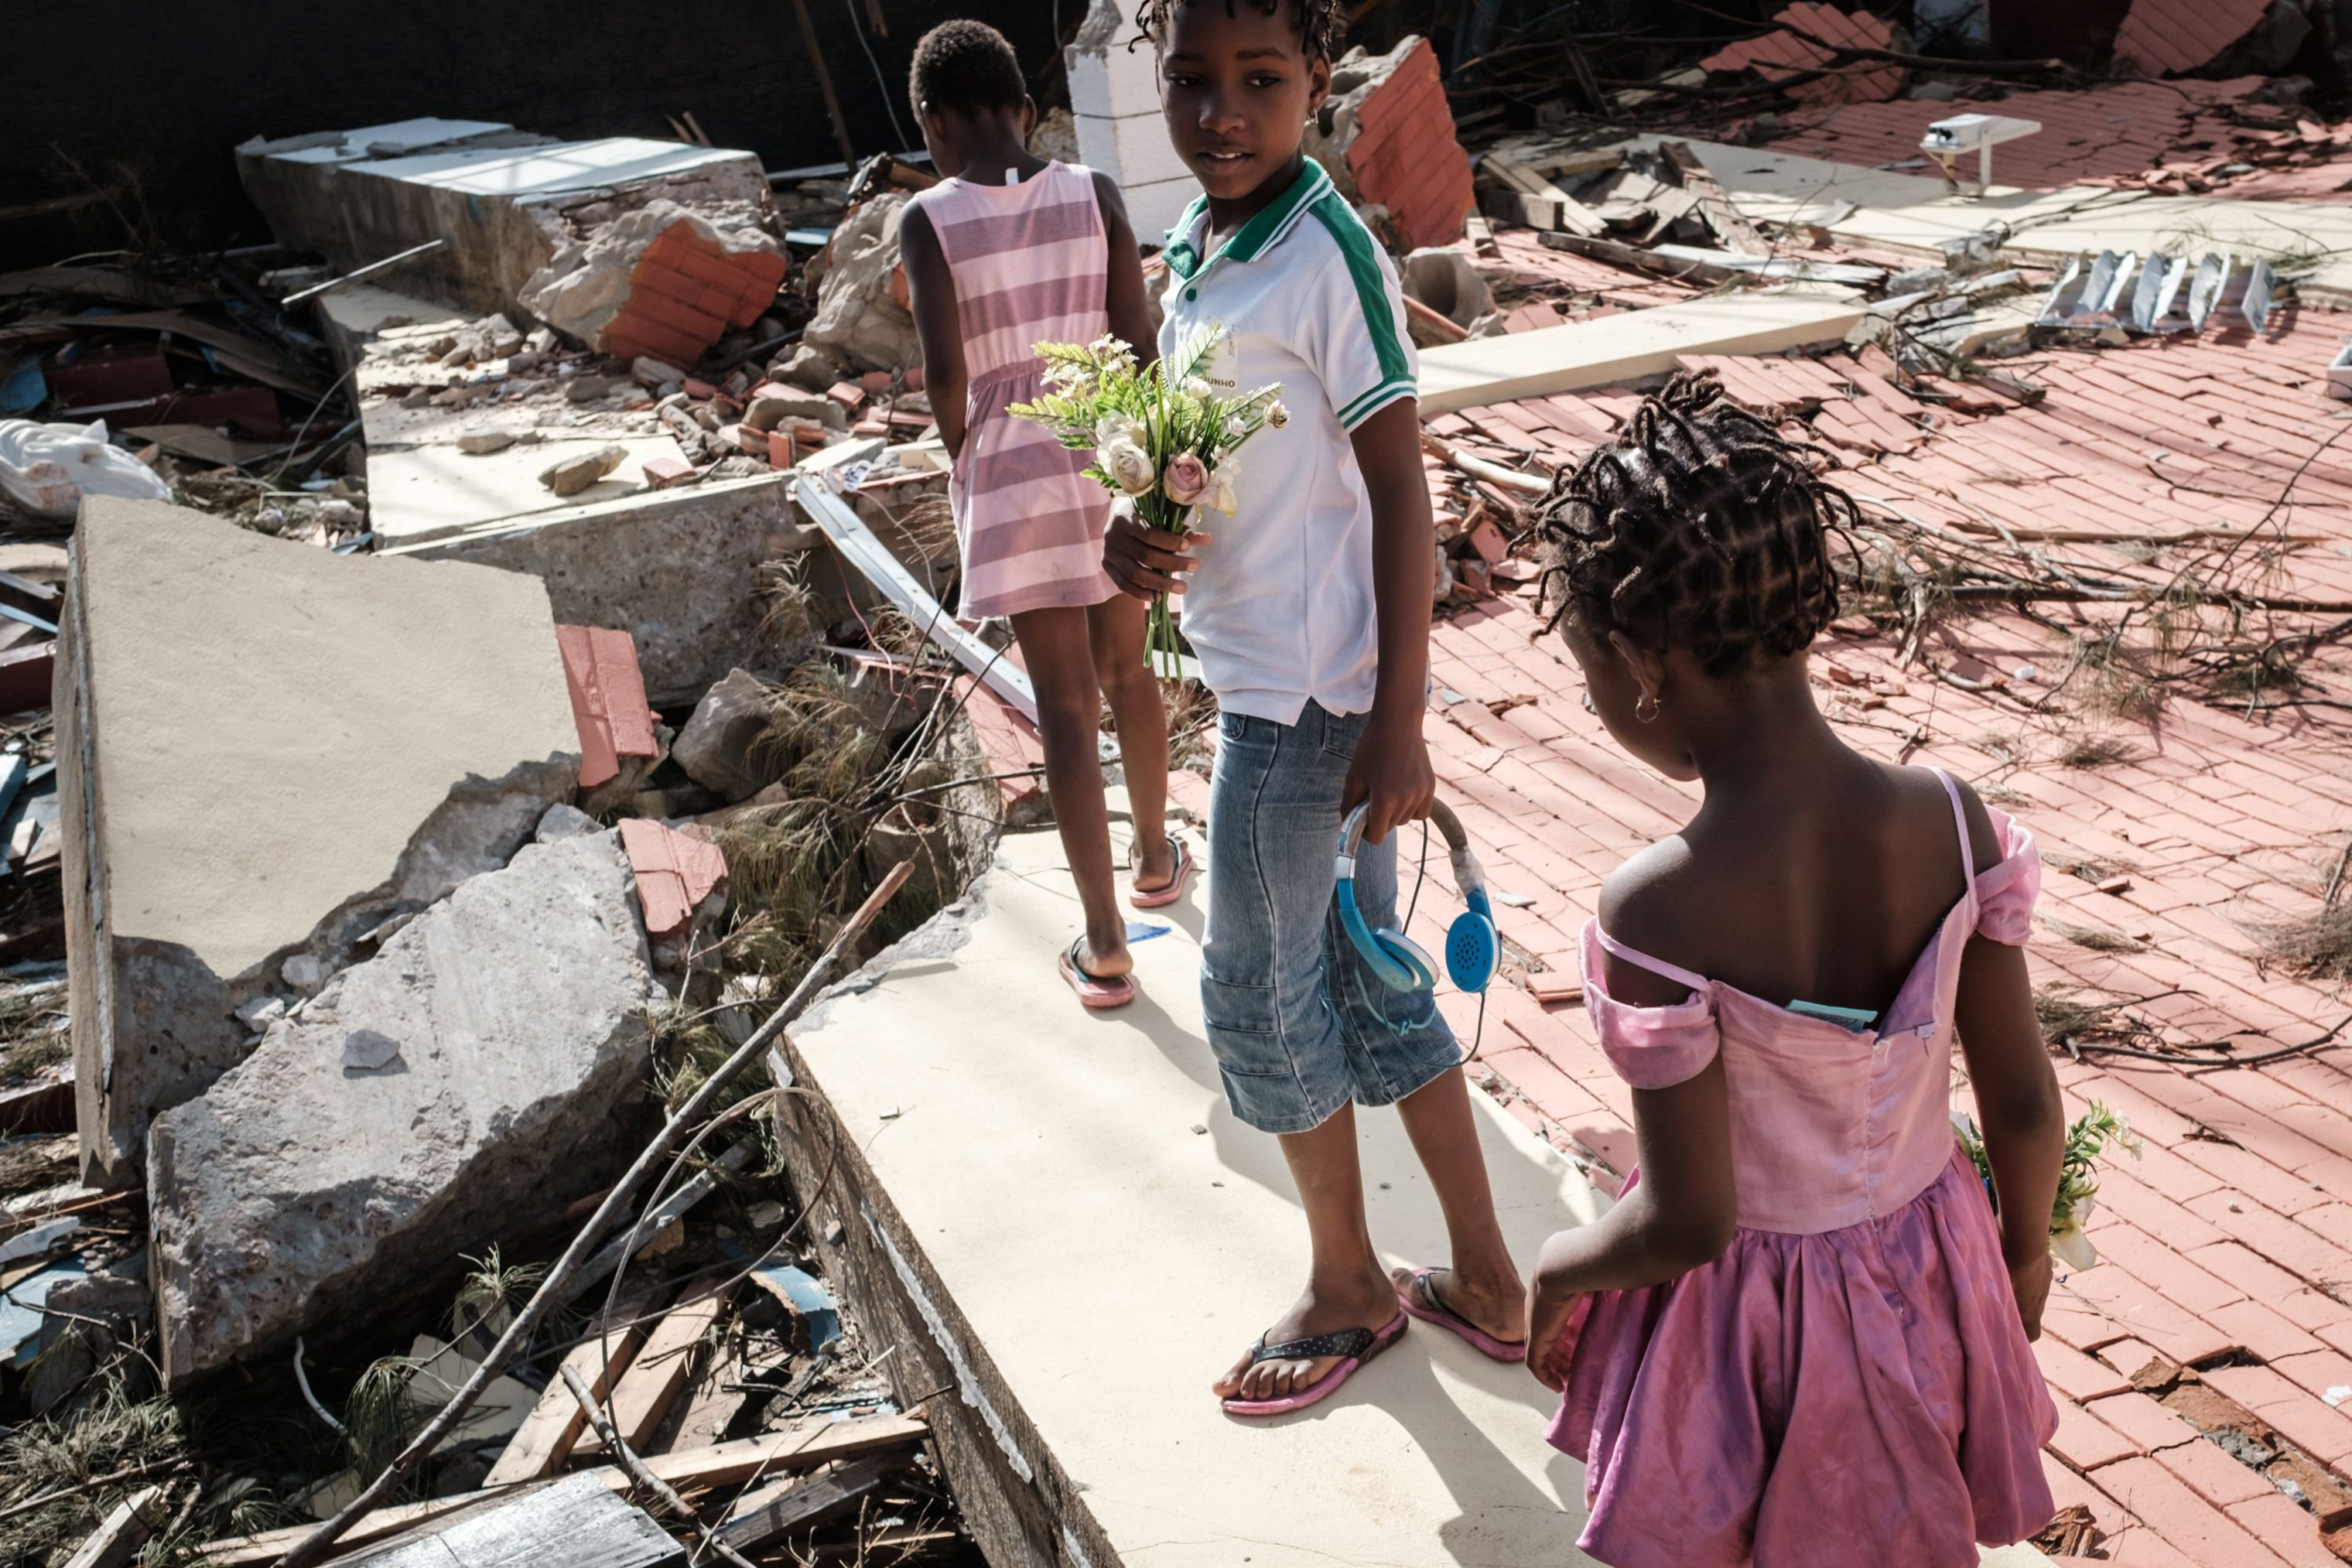 Girls collect artificial flowers from the rubble of a building destroyed by cyclone Idai at Sacred Heart Catholic Church in Beira, Mozambique, on March 24, 2019. (Yasuyoshi Chiba—AFP/Getty Images)